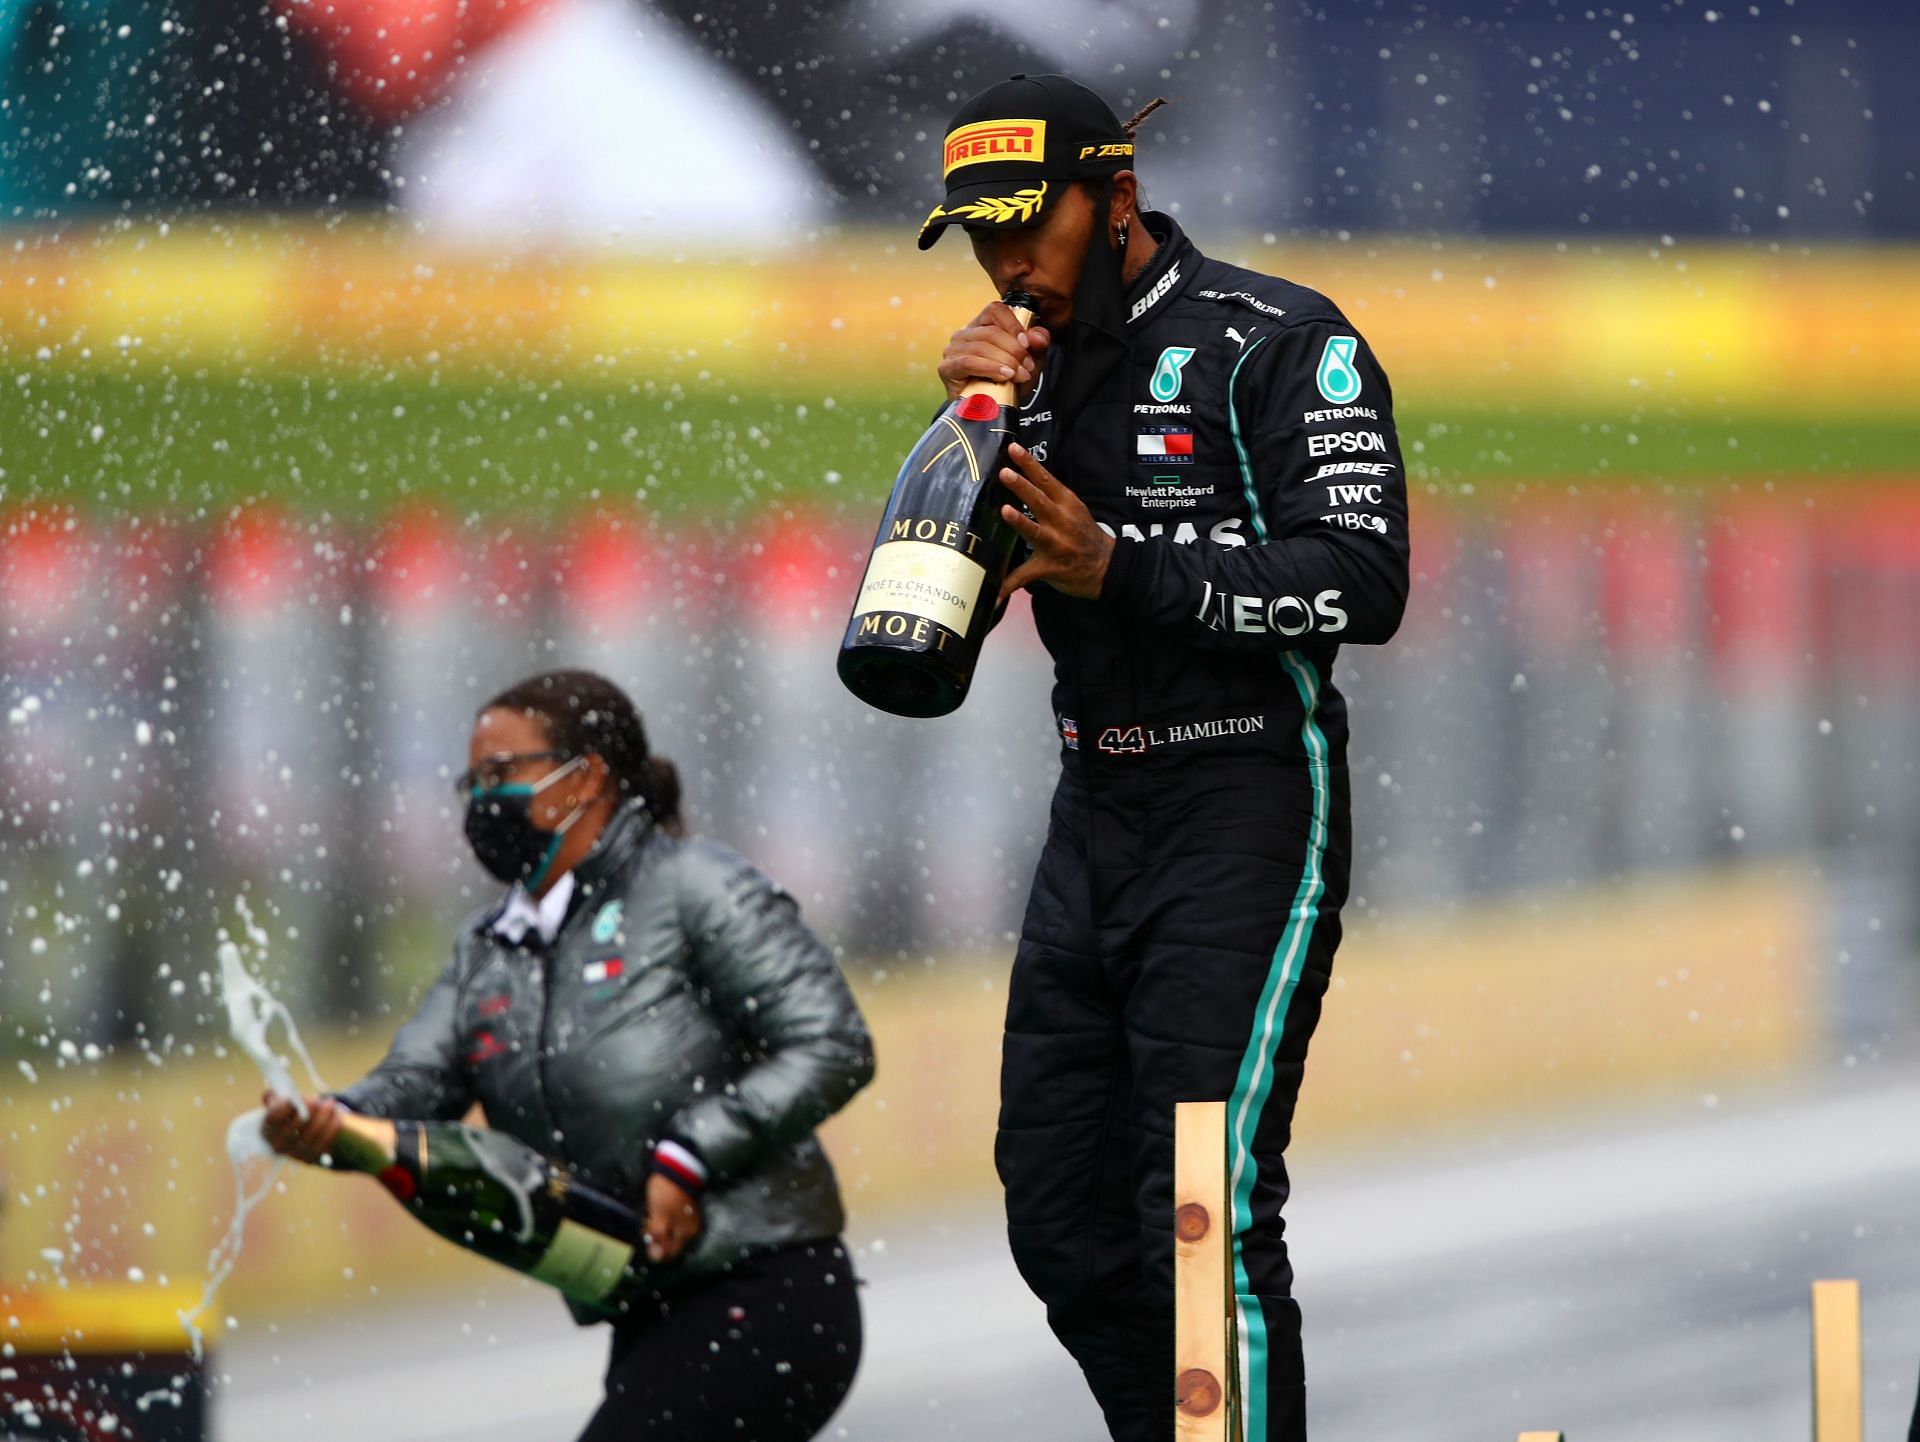 Stephanie Travers and Lewis Hamilton celebrate on the podium after winning the Formula One Grand Prix of Styria at Red Bull Ring on July 12, 2020, in Spielberg, Austria (Photo by Bryn Lennon/Getty Images)